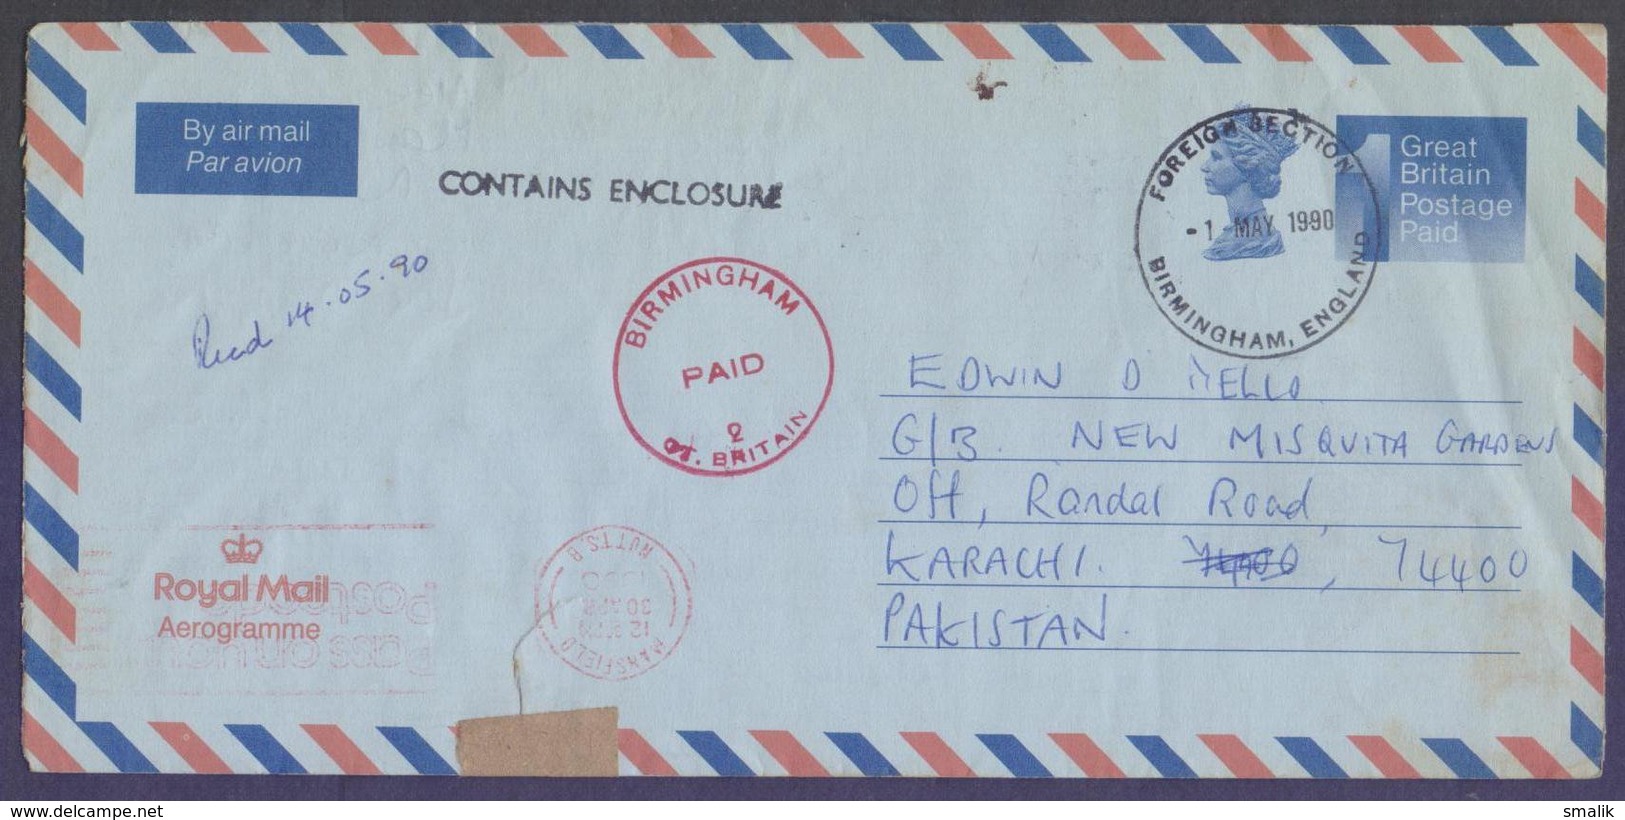 Great Britain UK GB, Postal History, Postage PAID Aerogramme Stationery Used 1.5.1990 FOREIGN SECTION BIRMINGHAM - Covers & Documents